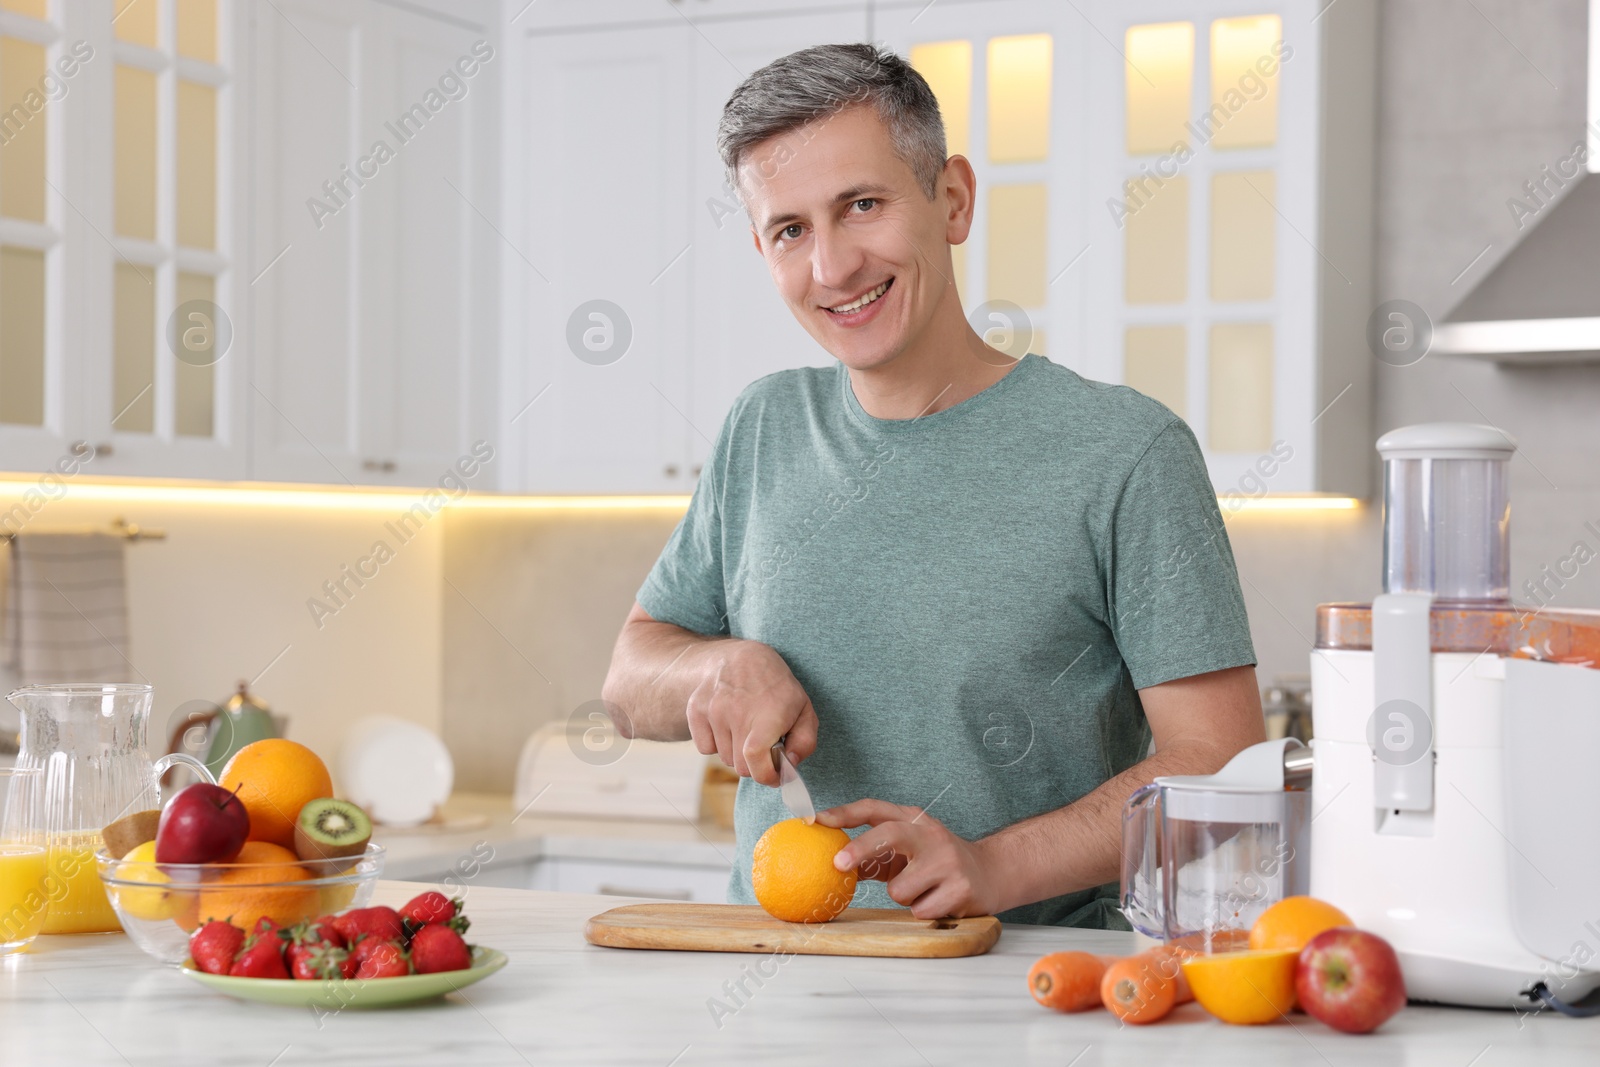 Photo of Juicer and fresh products on white marble table. Smiling man cutting orange in kitchen